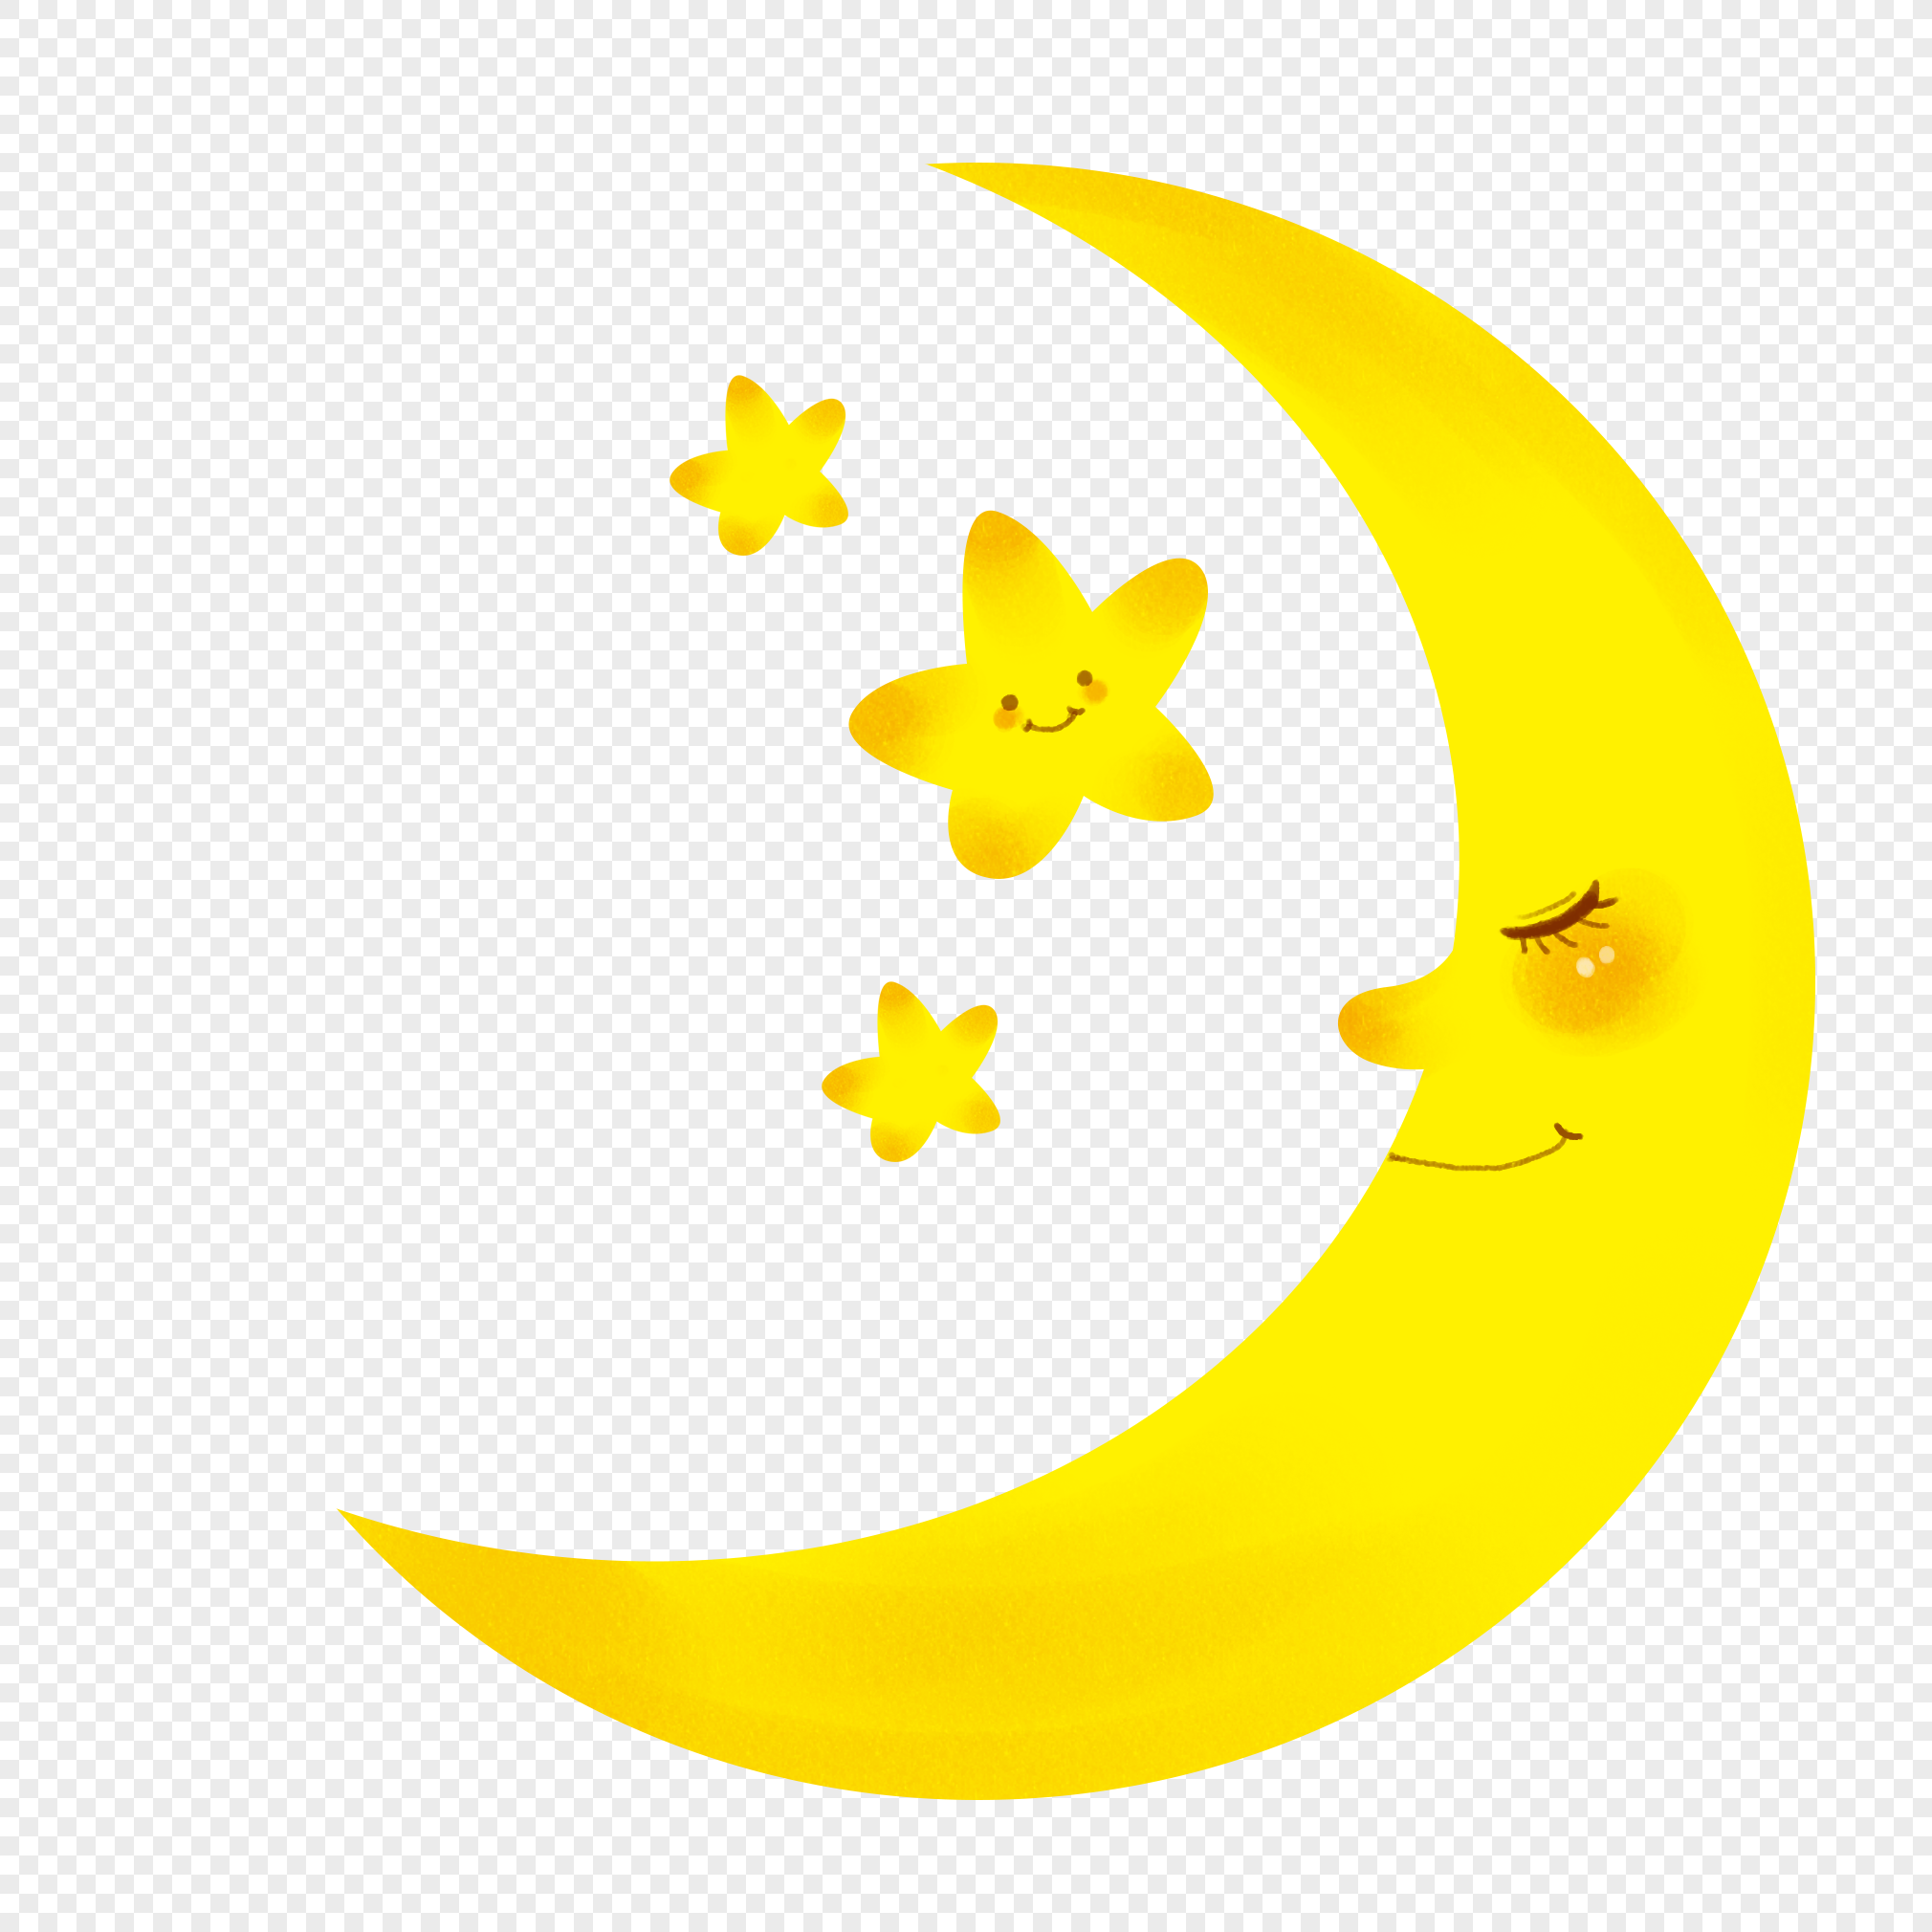 Moon Cartoon Images, HD Pictures For Free Vectors Download 